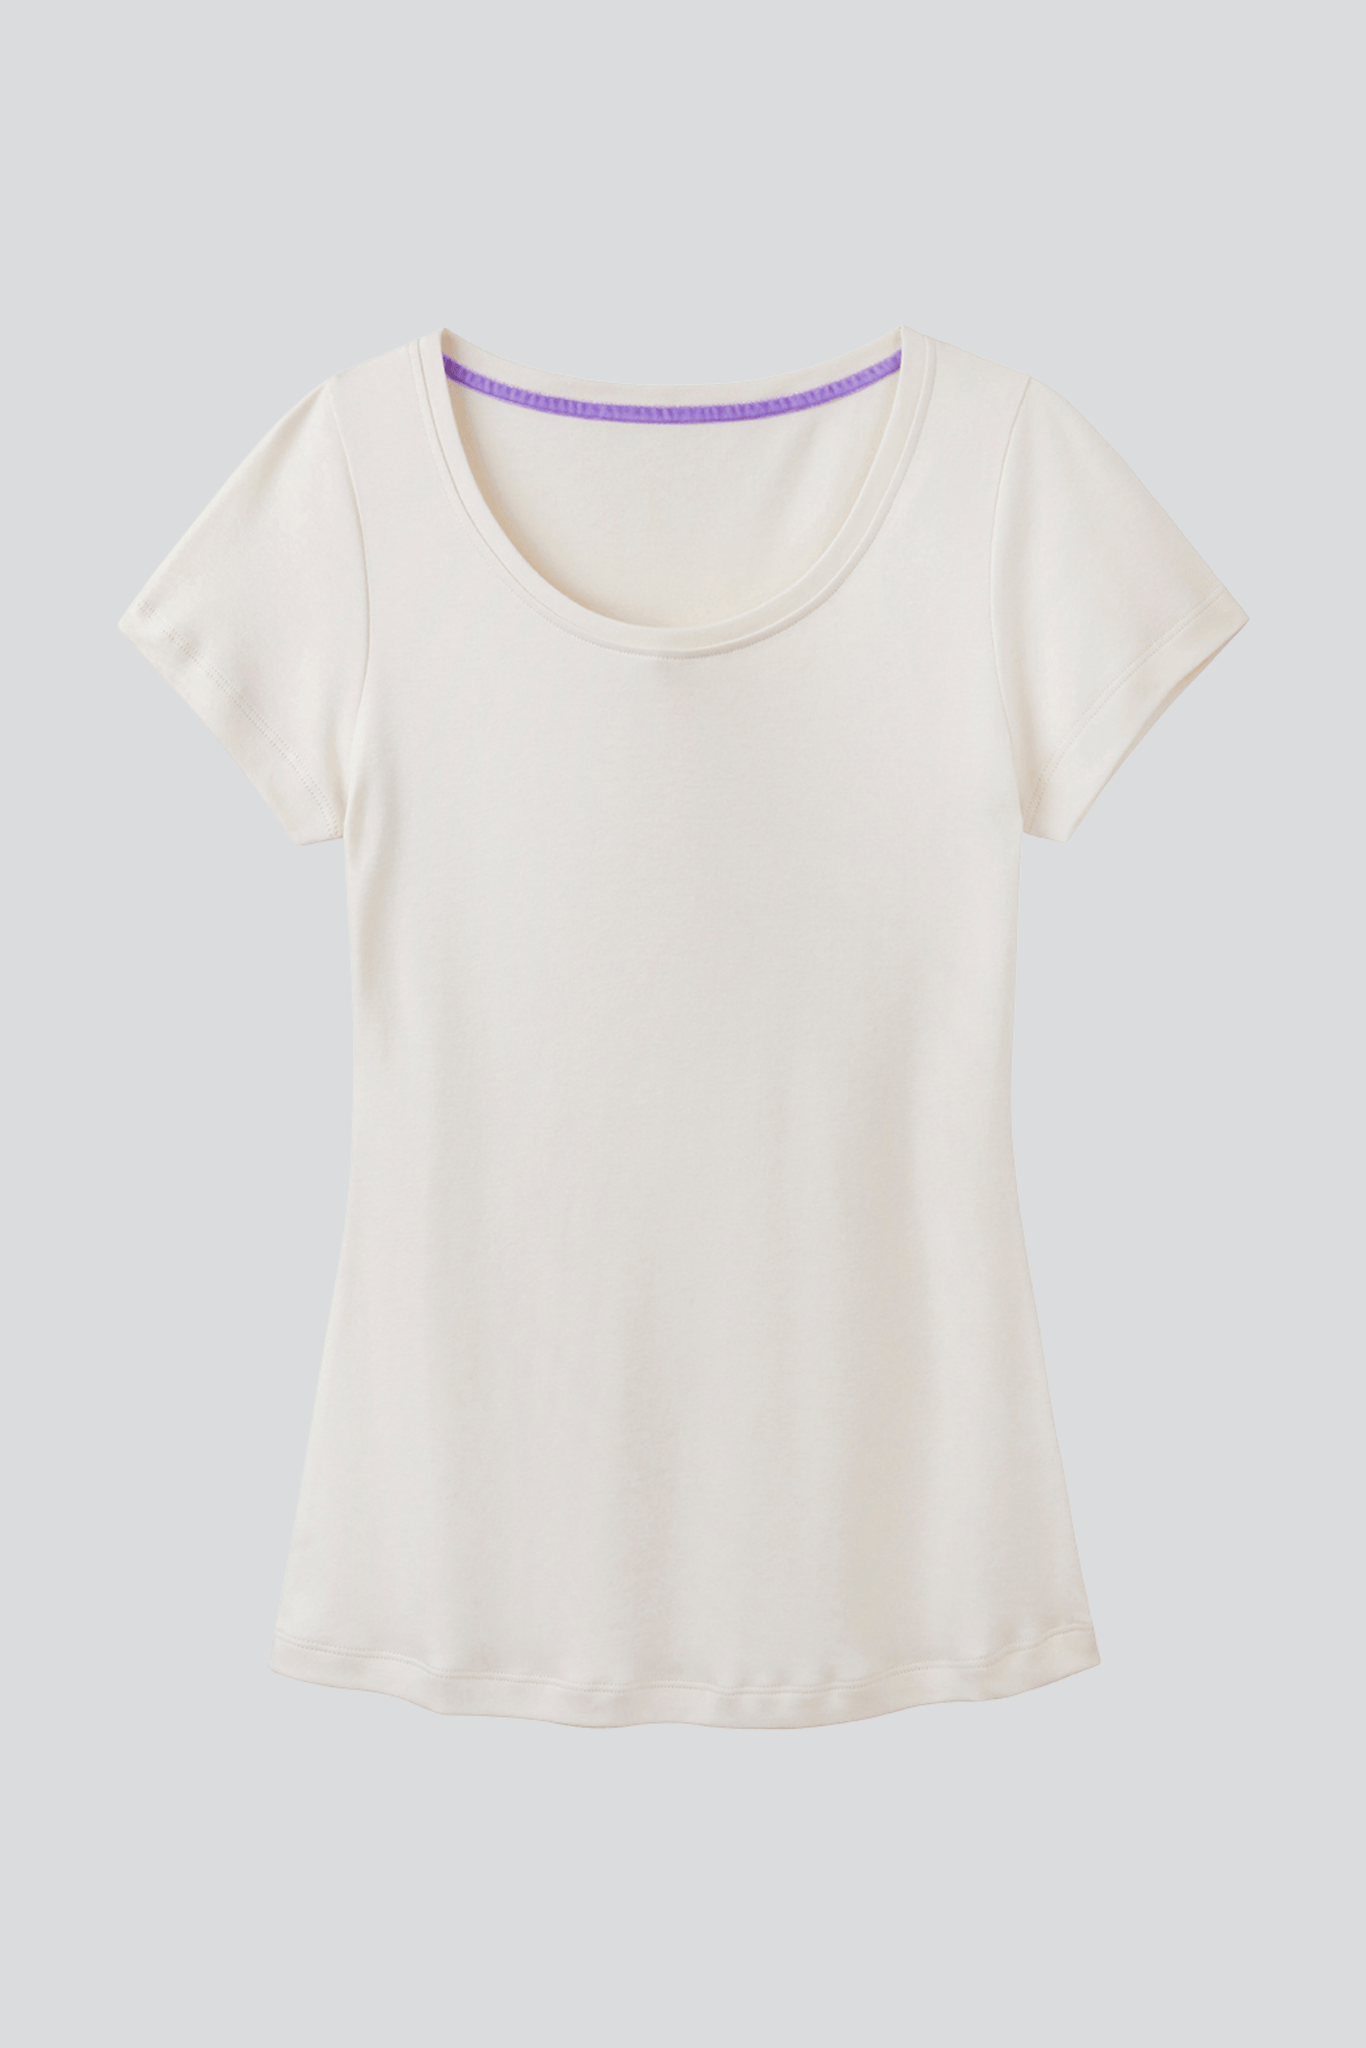 Women's Quality Scoop Neck Cotton Modal Blend T-shirt in Cream - Essential Short Sleeve T-shirt by Lavender Hill Clothing